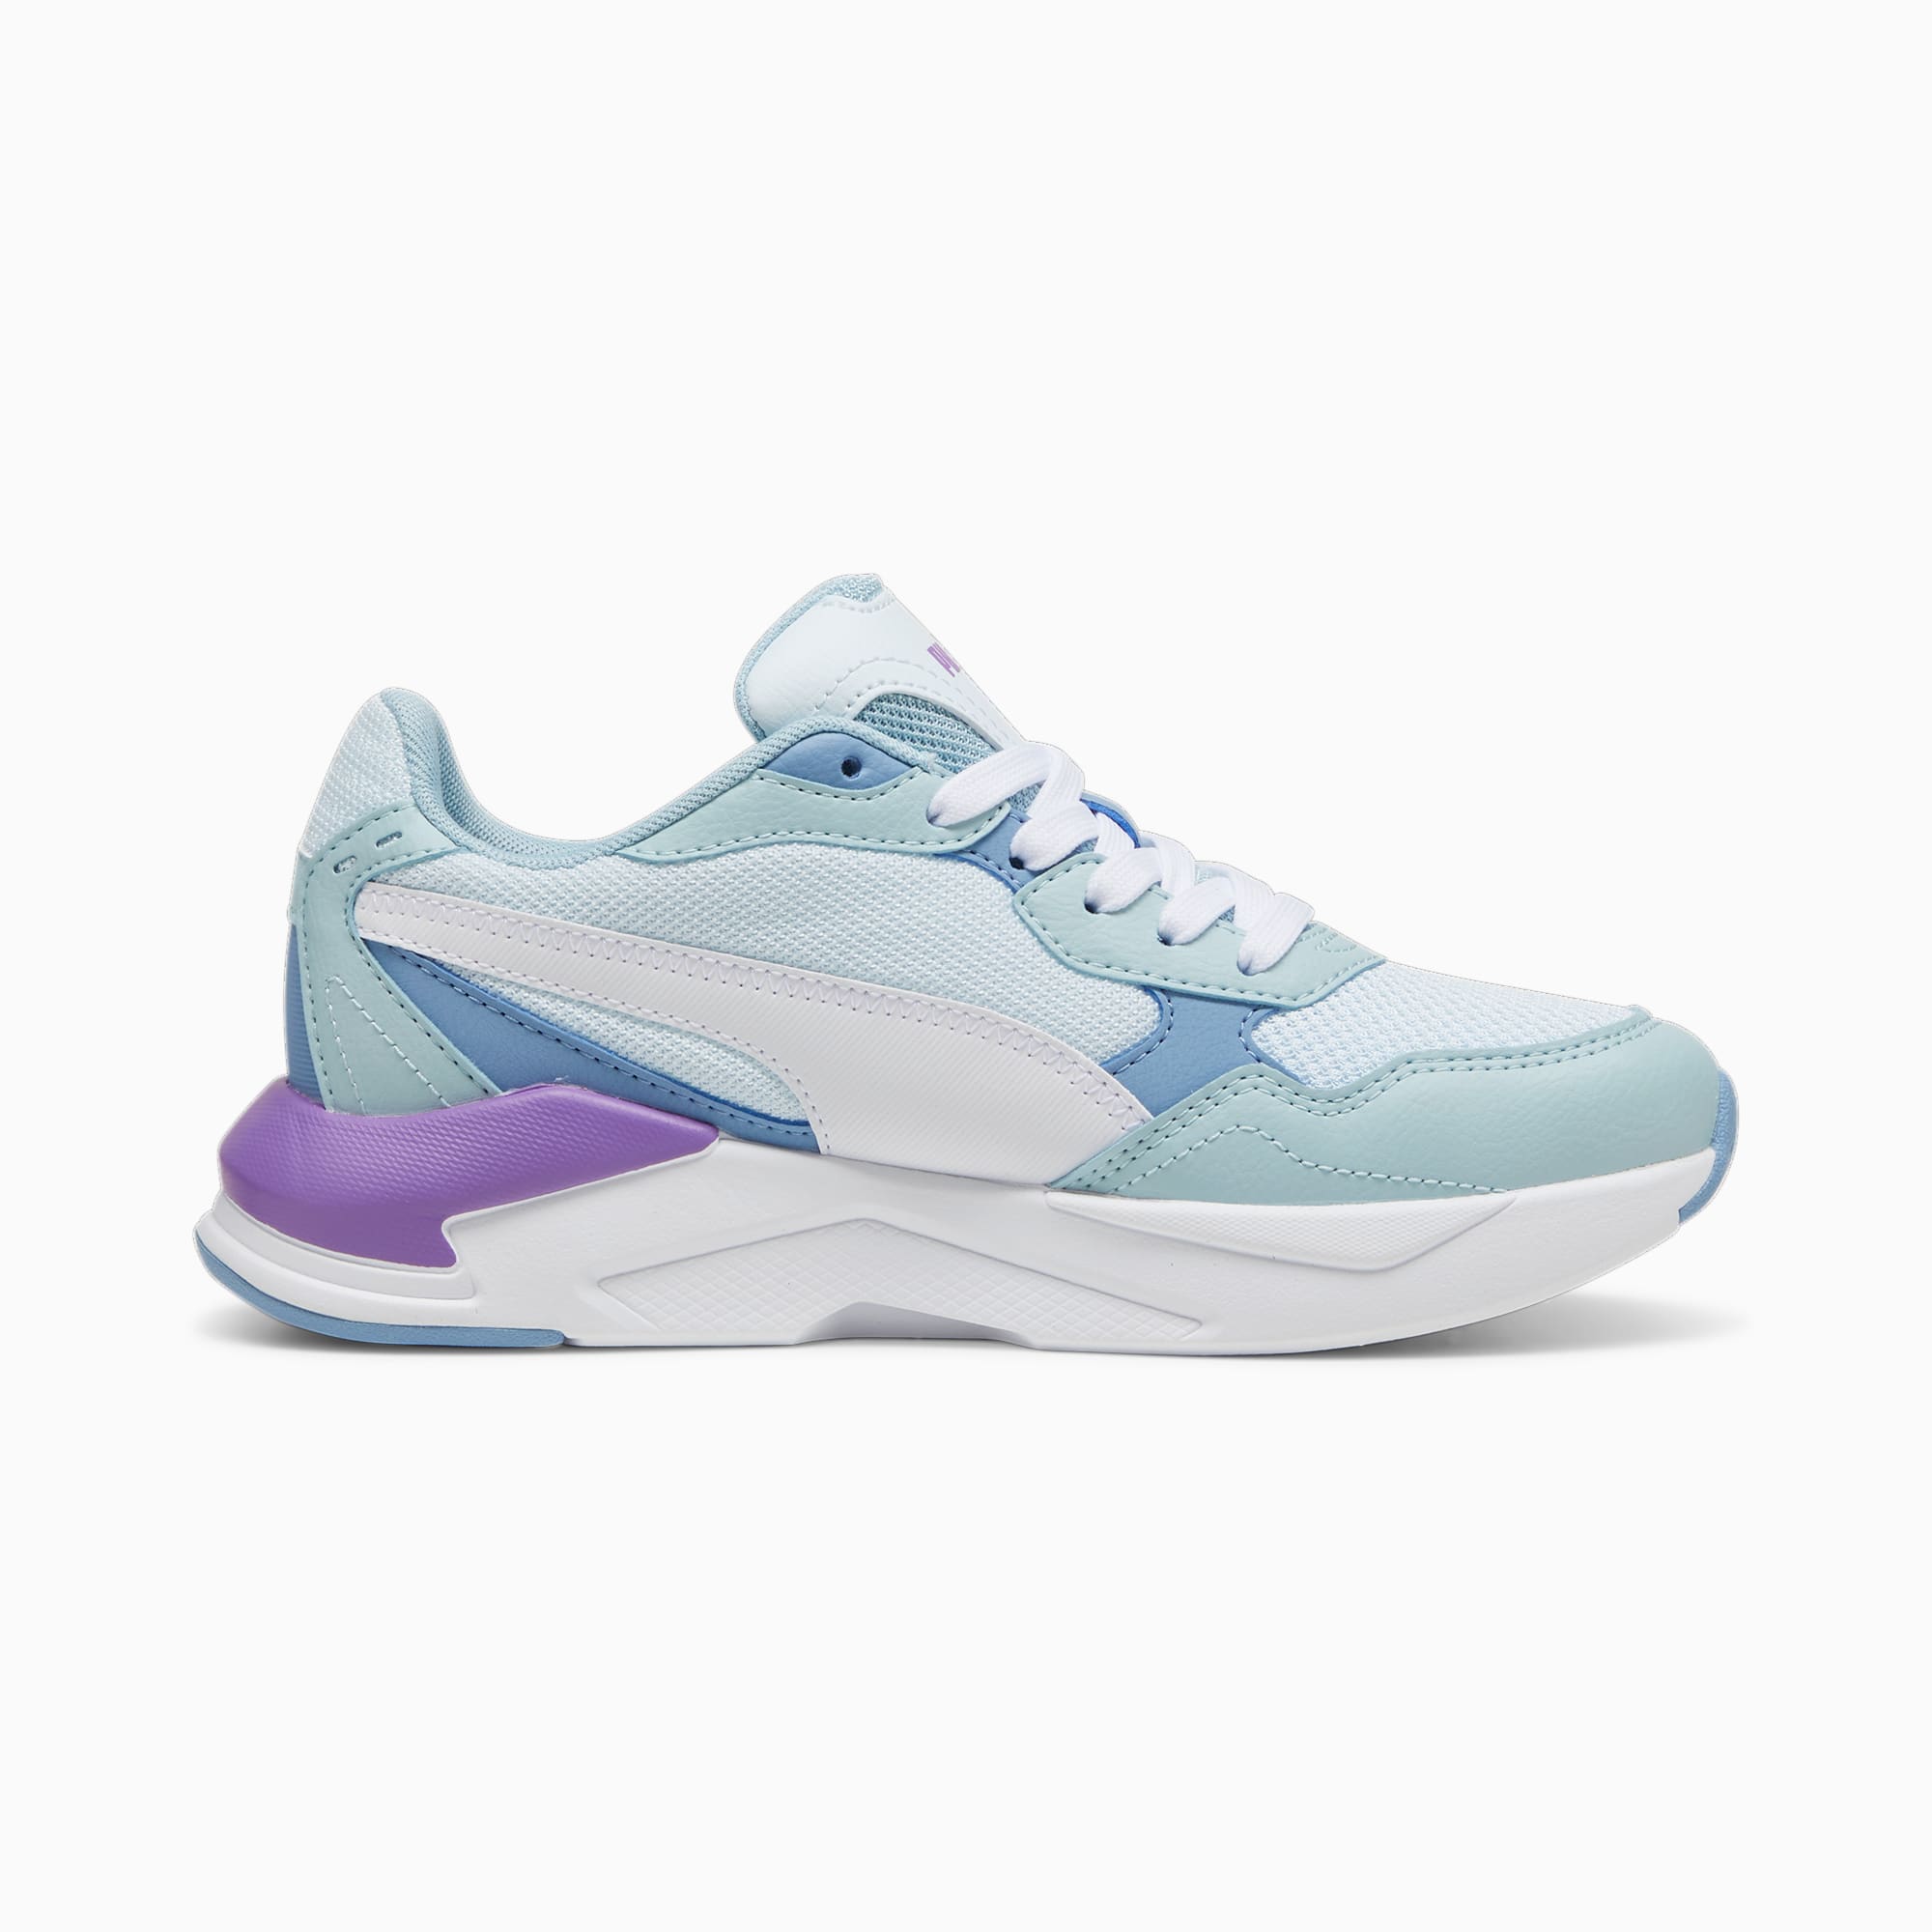 PUMA X-Ray Speed Lite Youth Trainers, Dewdrop/White/Turquoise Surf, Size 35,5, Shoes